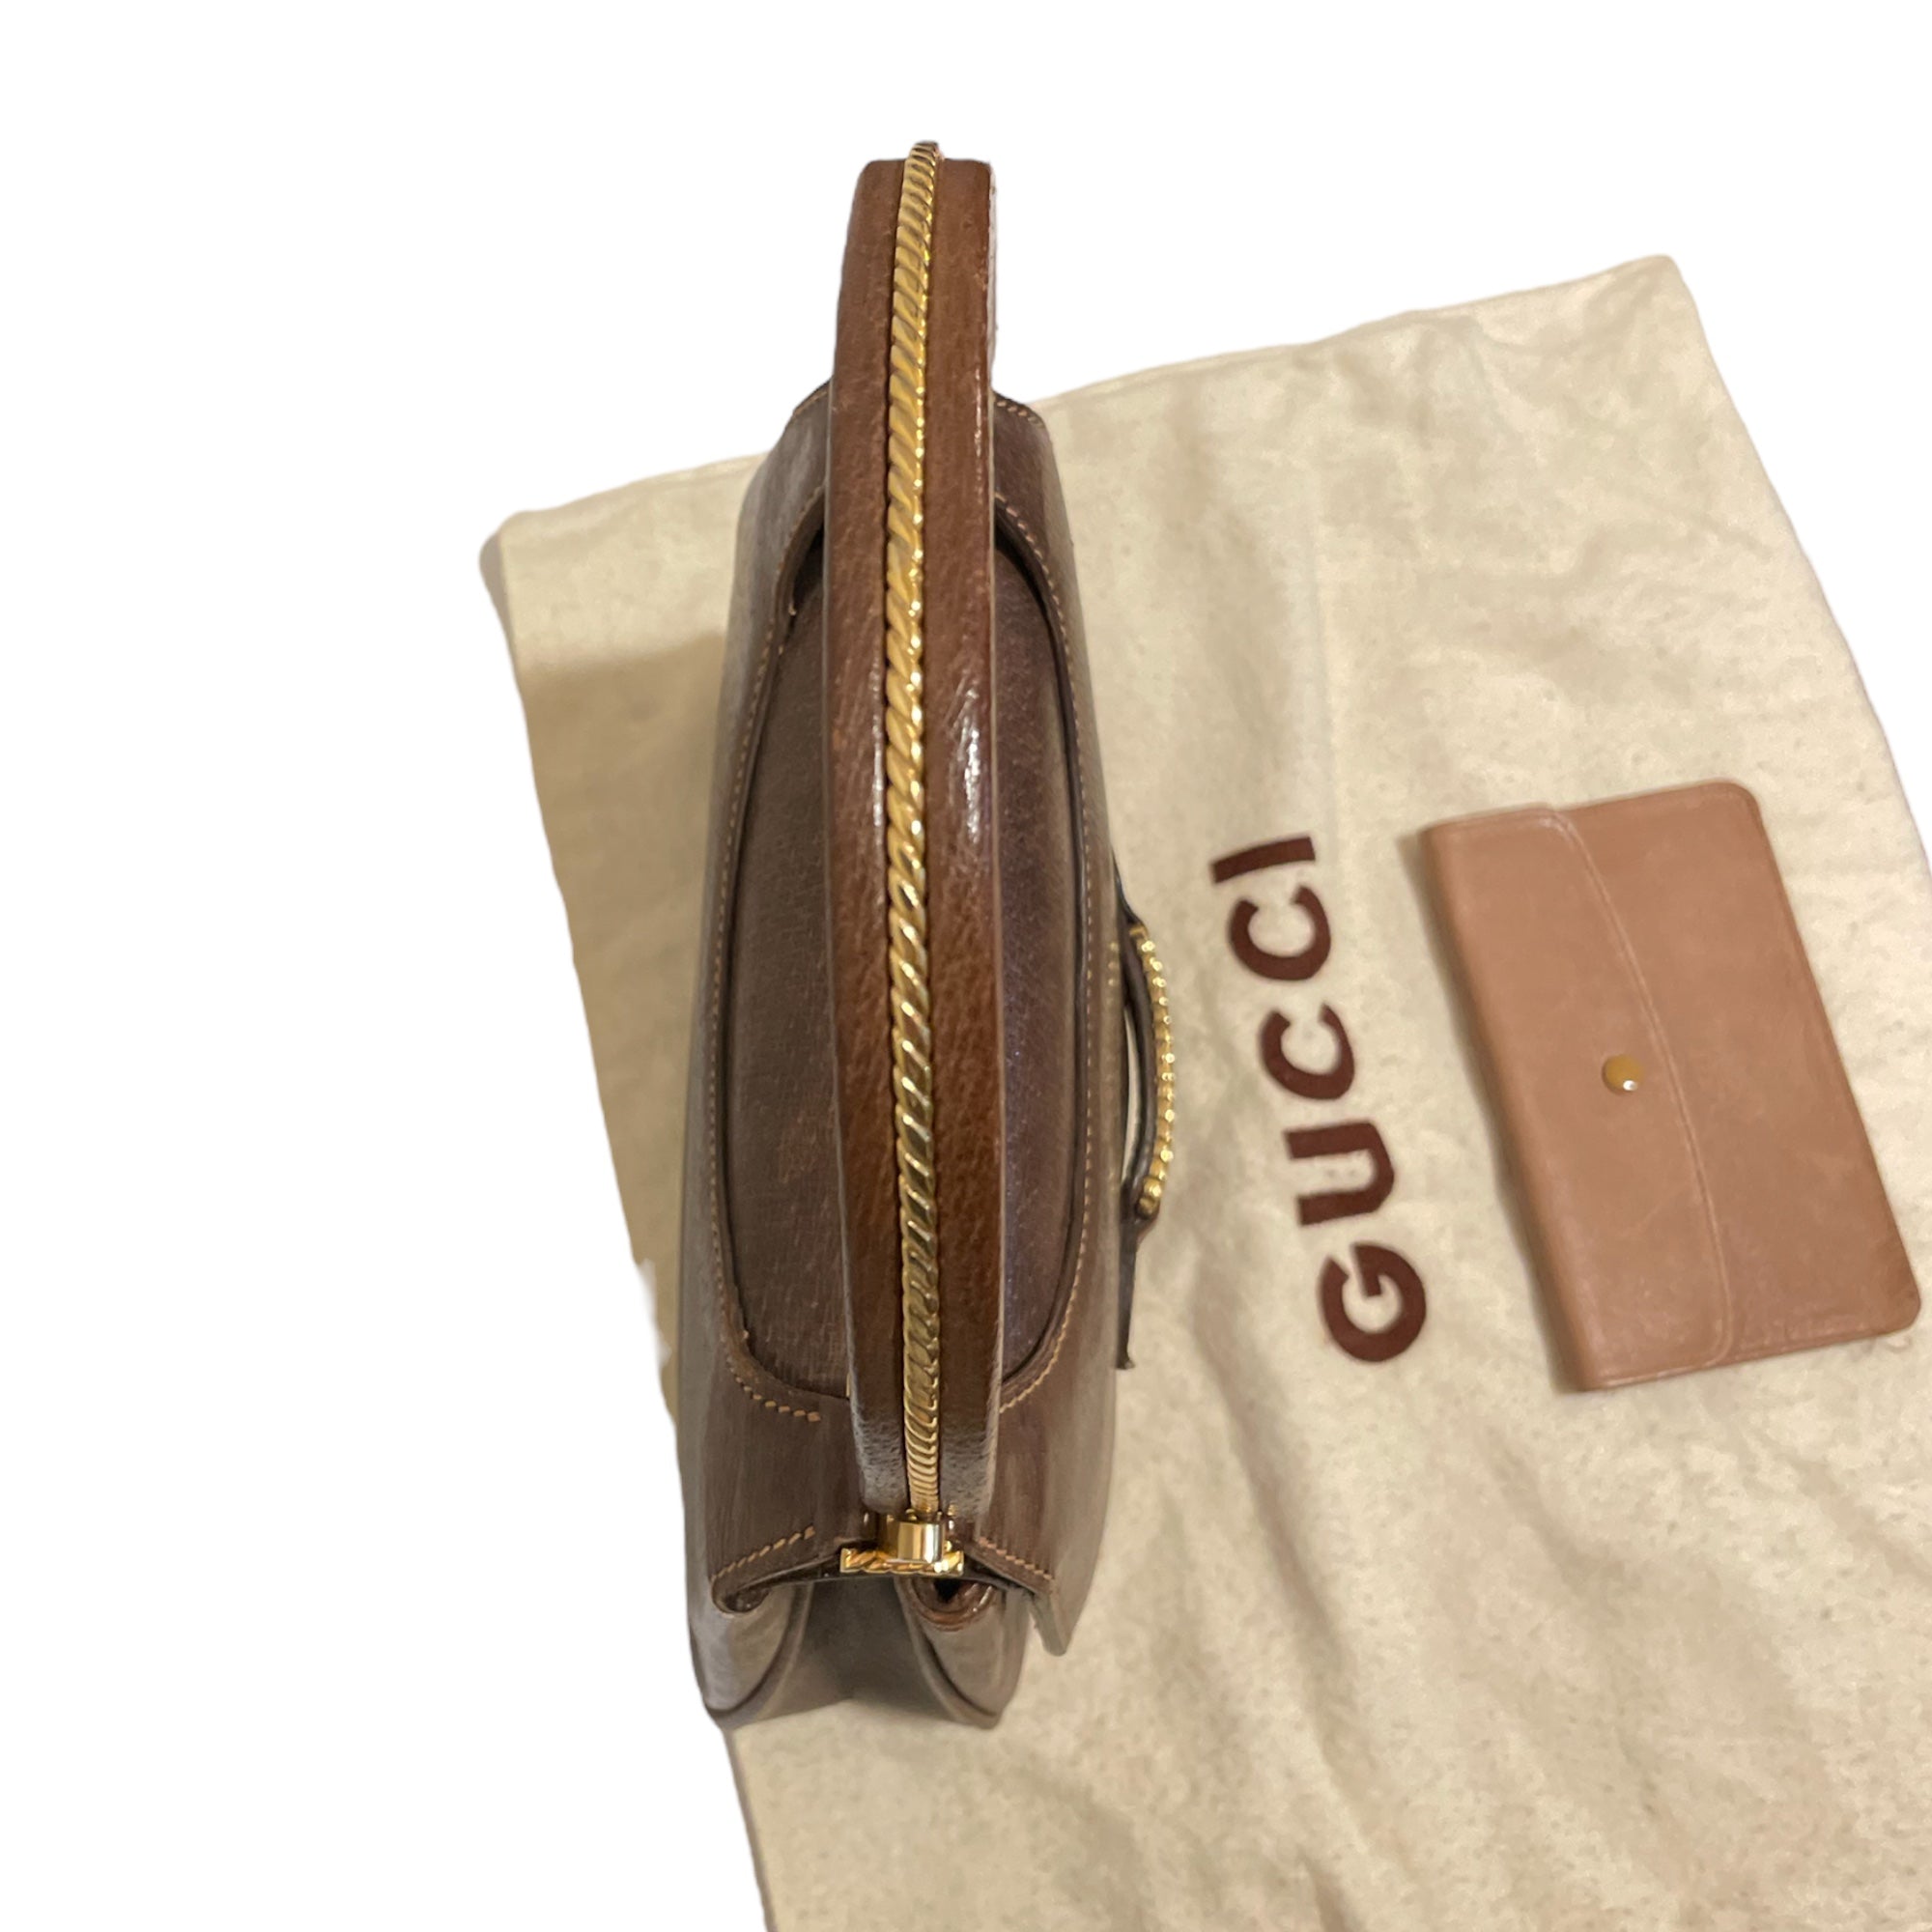 GUCCI LEATHER HEART COIN PURSE NWT. | Gucci leather, Vintage gucci, Purses